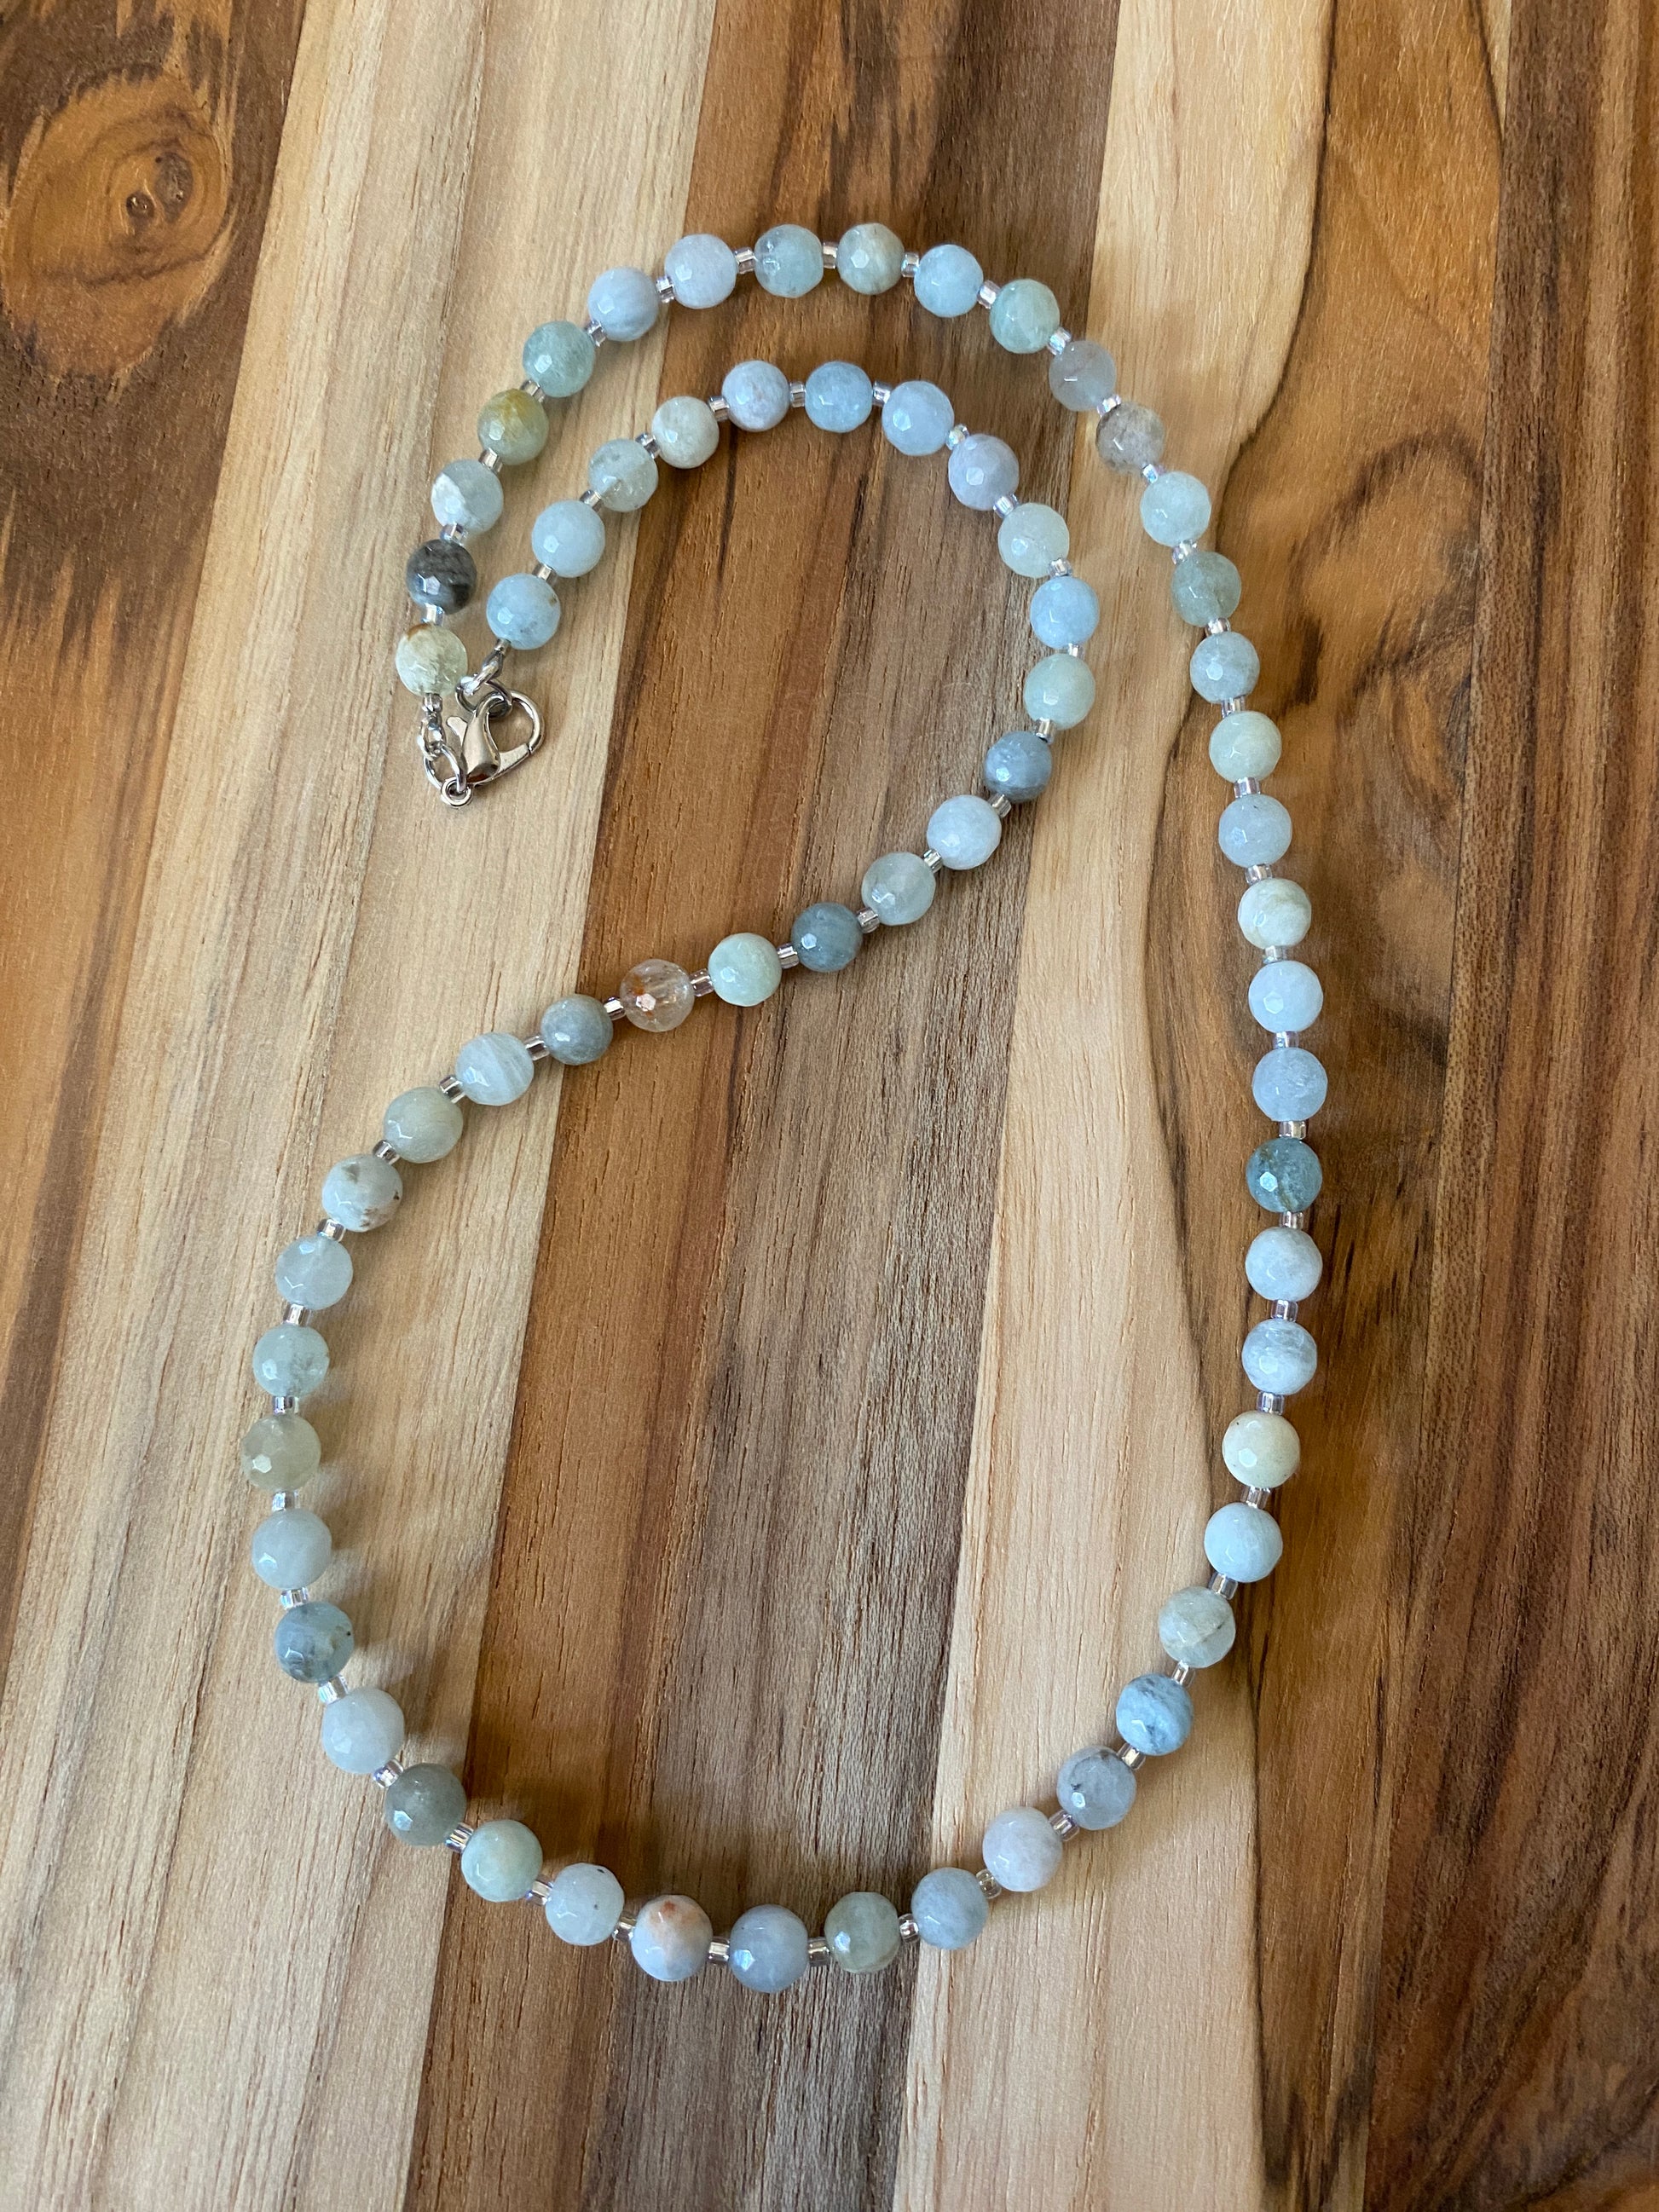 Dainty Faceted Aquamarine Beaded Necklace - My Urban Gems